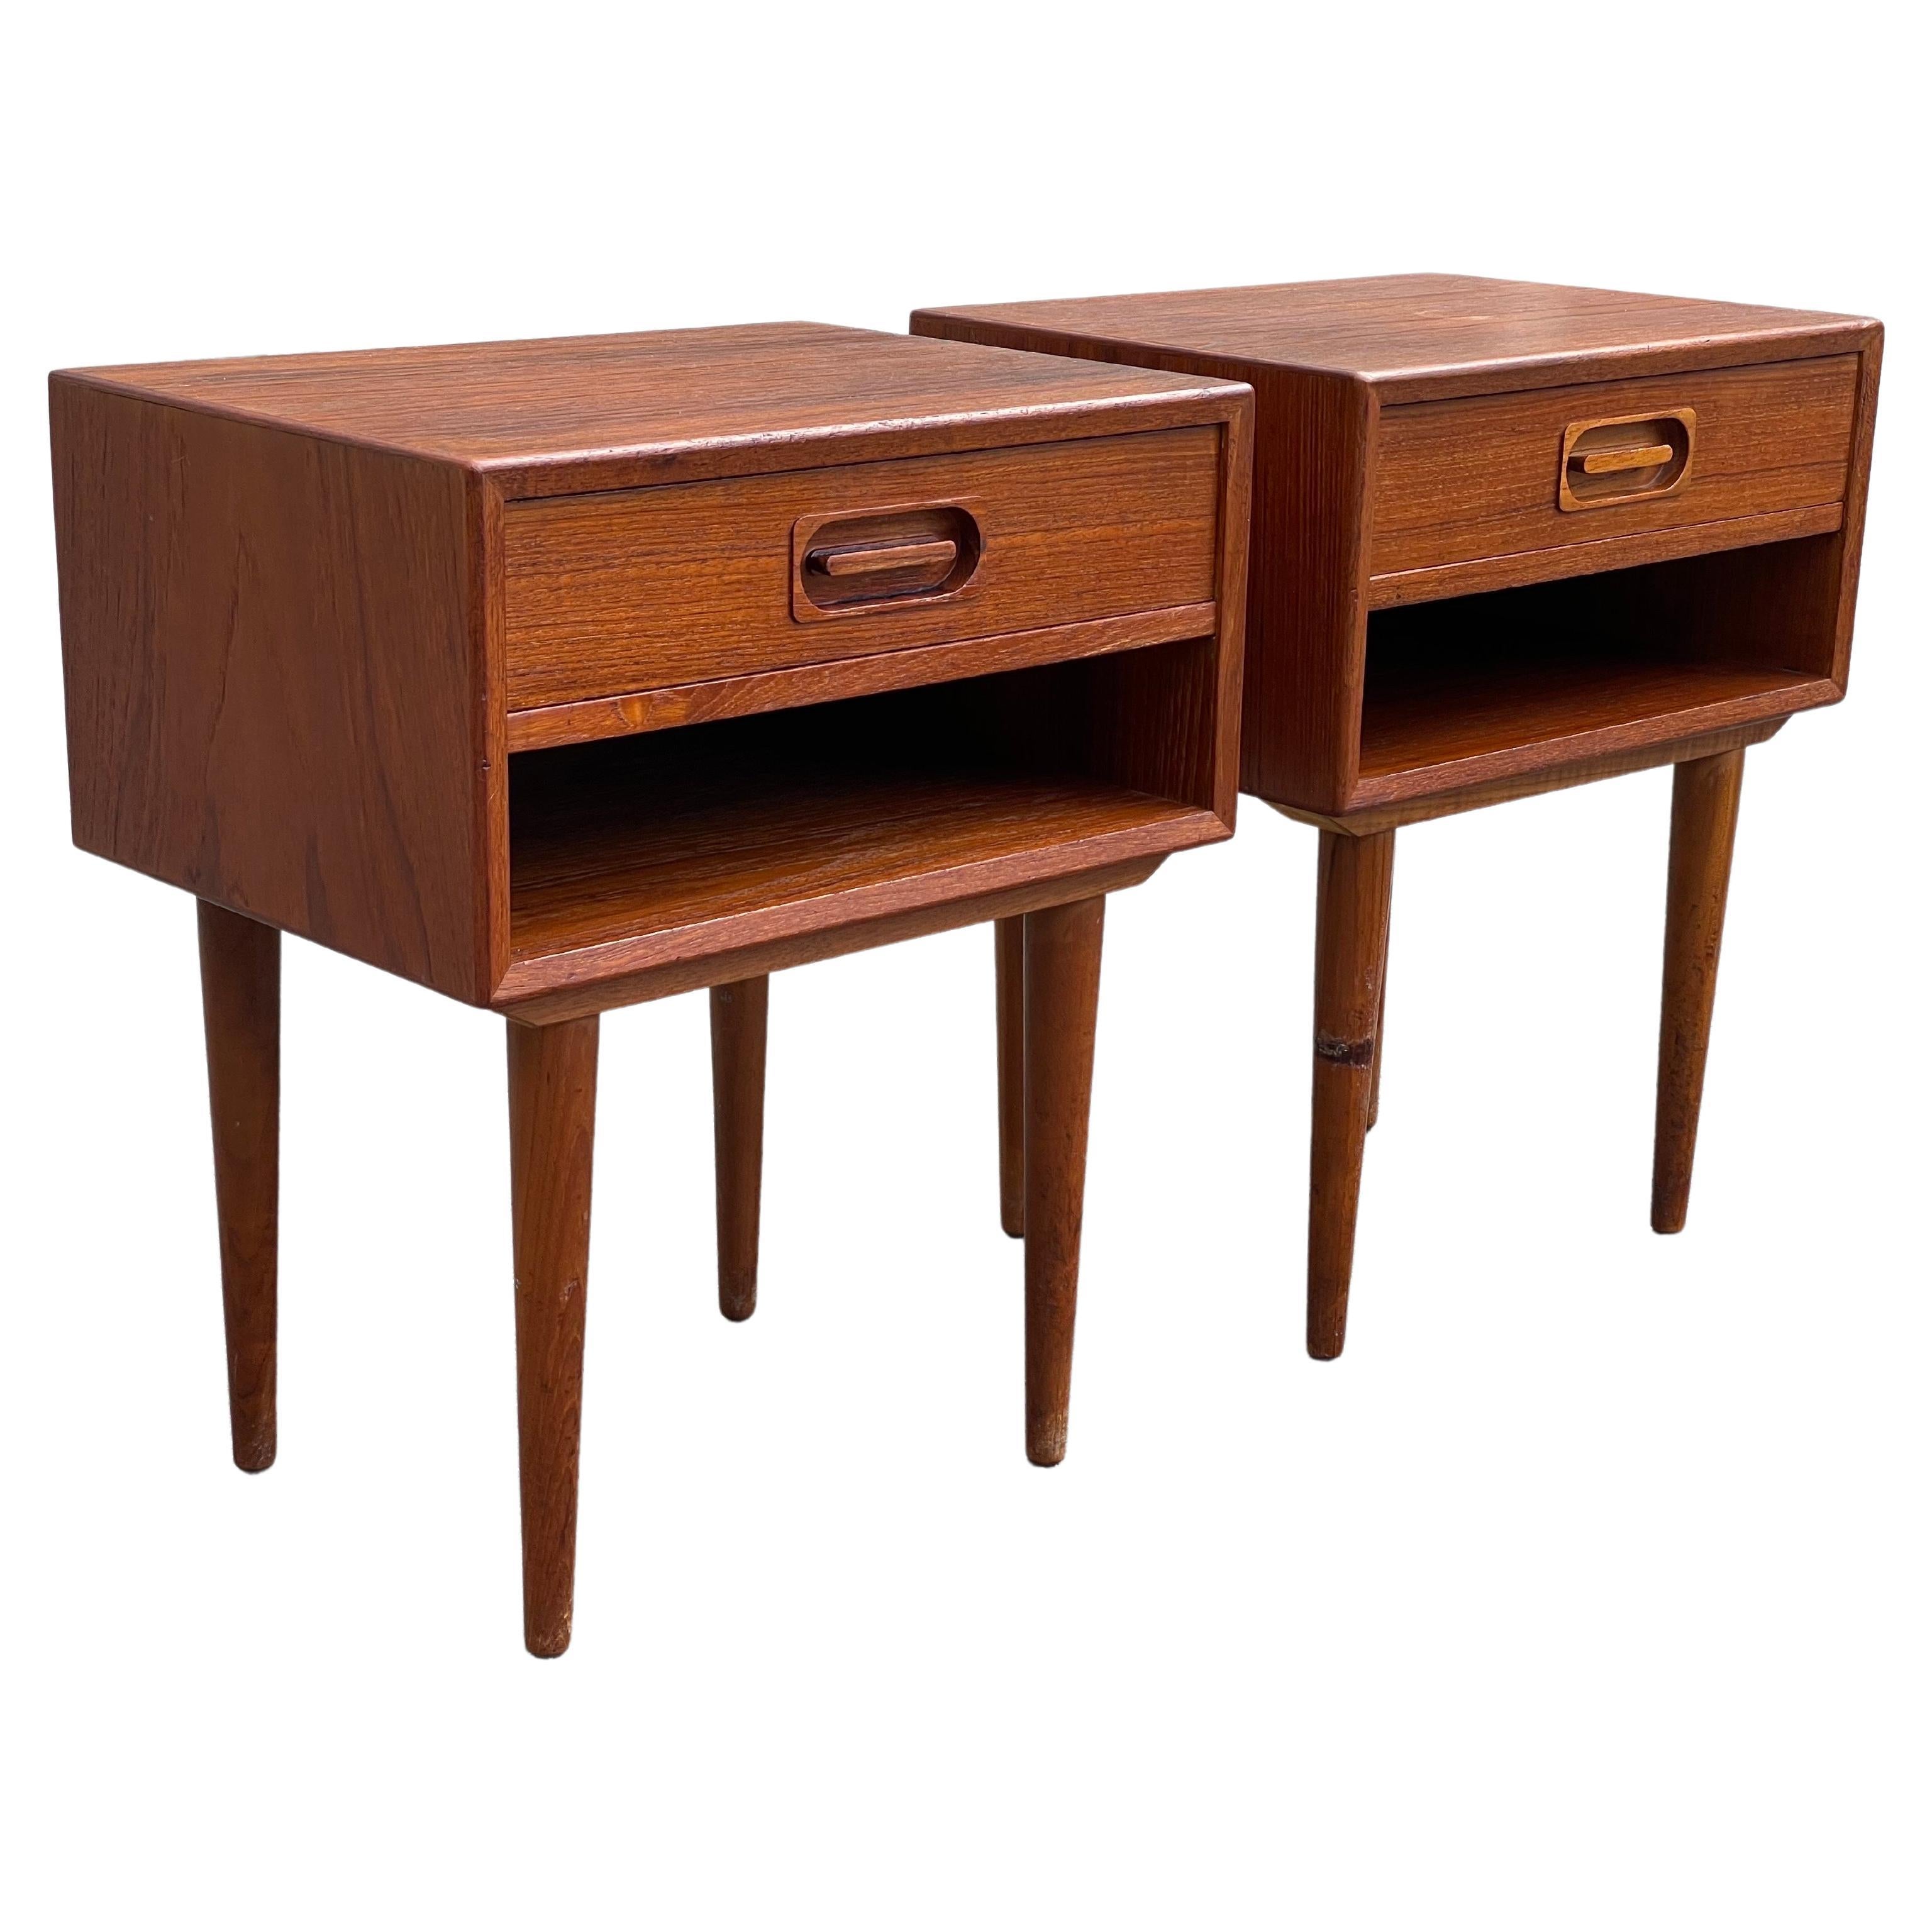 A pair of rare Johannes Andersen for Dyrlund teak nightstands from the 1960´s